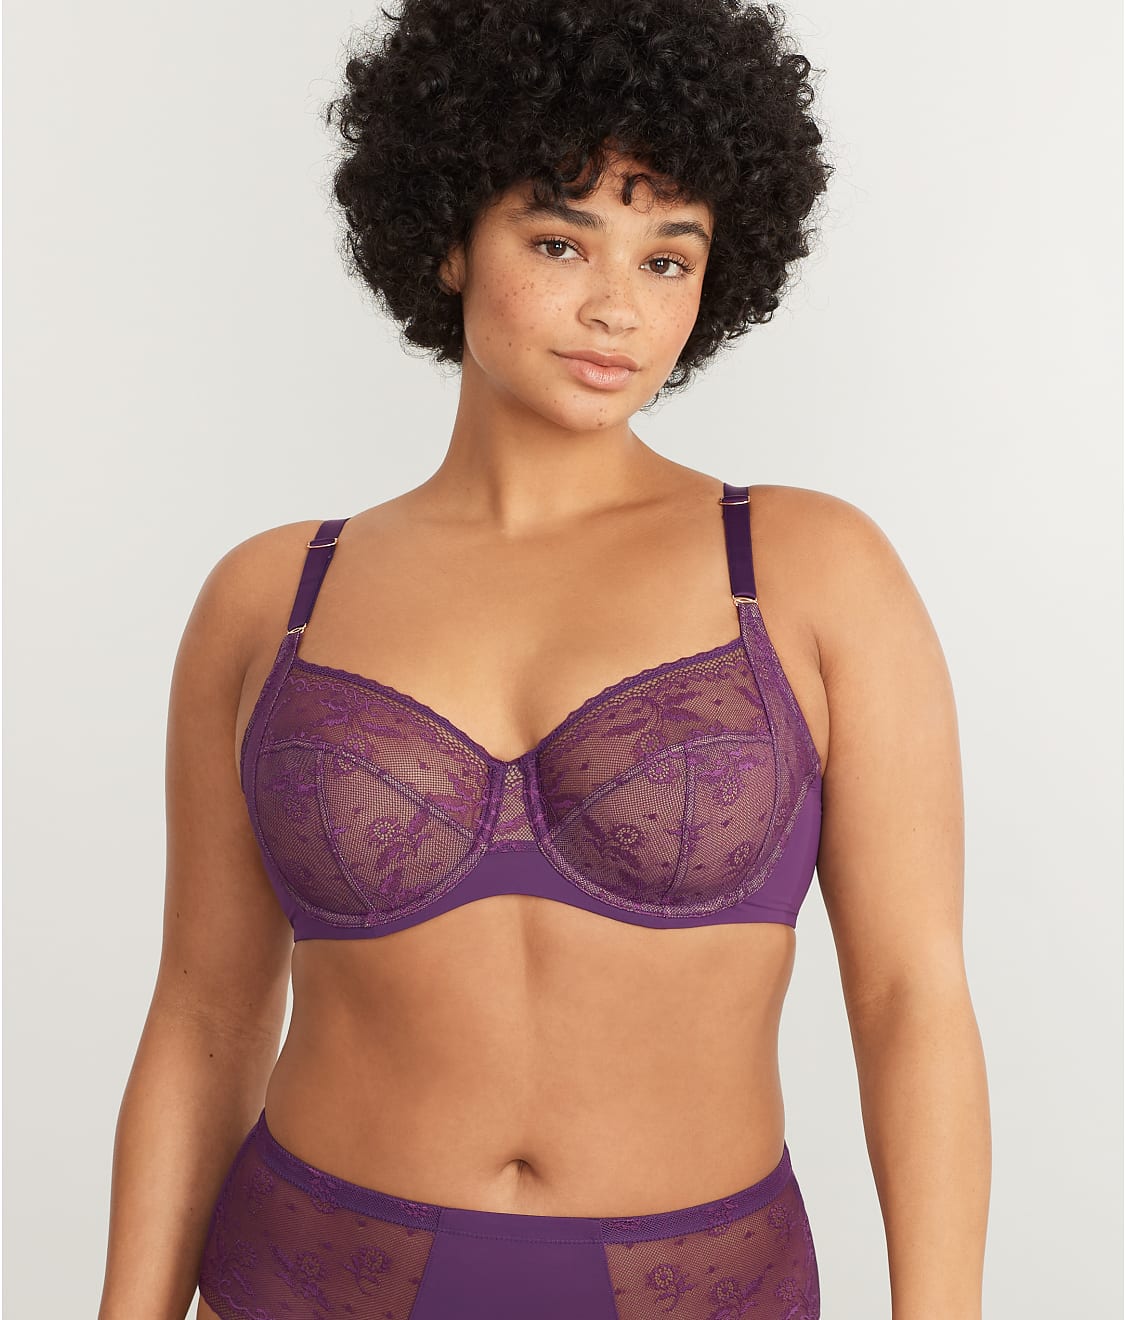 Soma - Lightest Lift Perfect Coverage Bra Lace Overlay - 36C